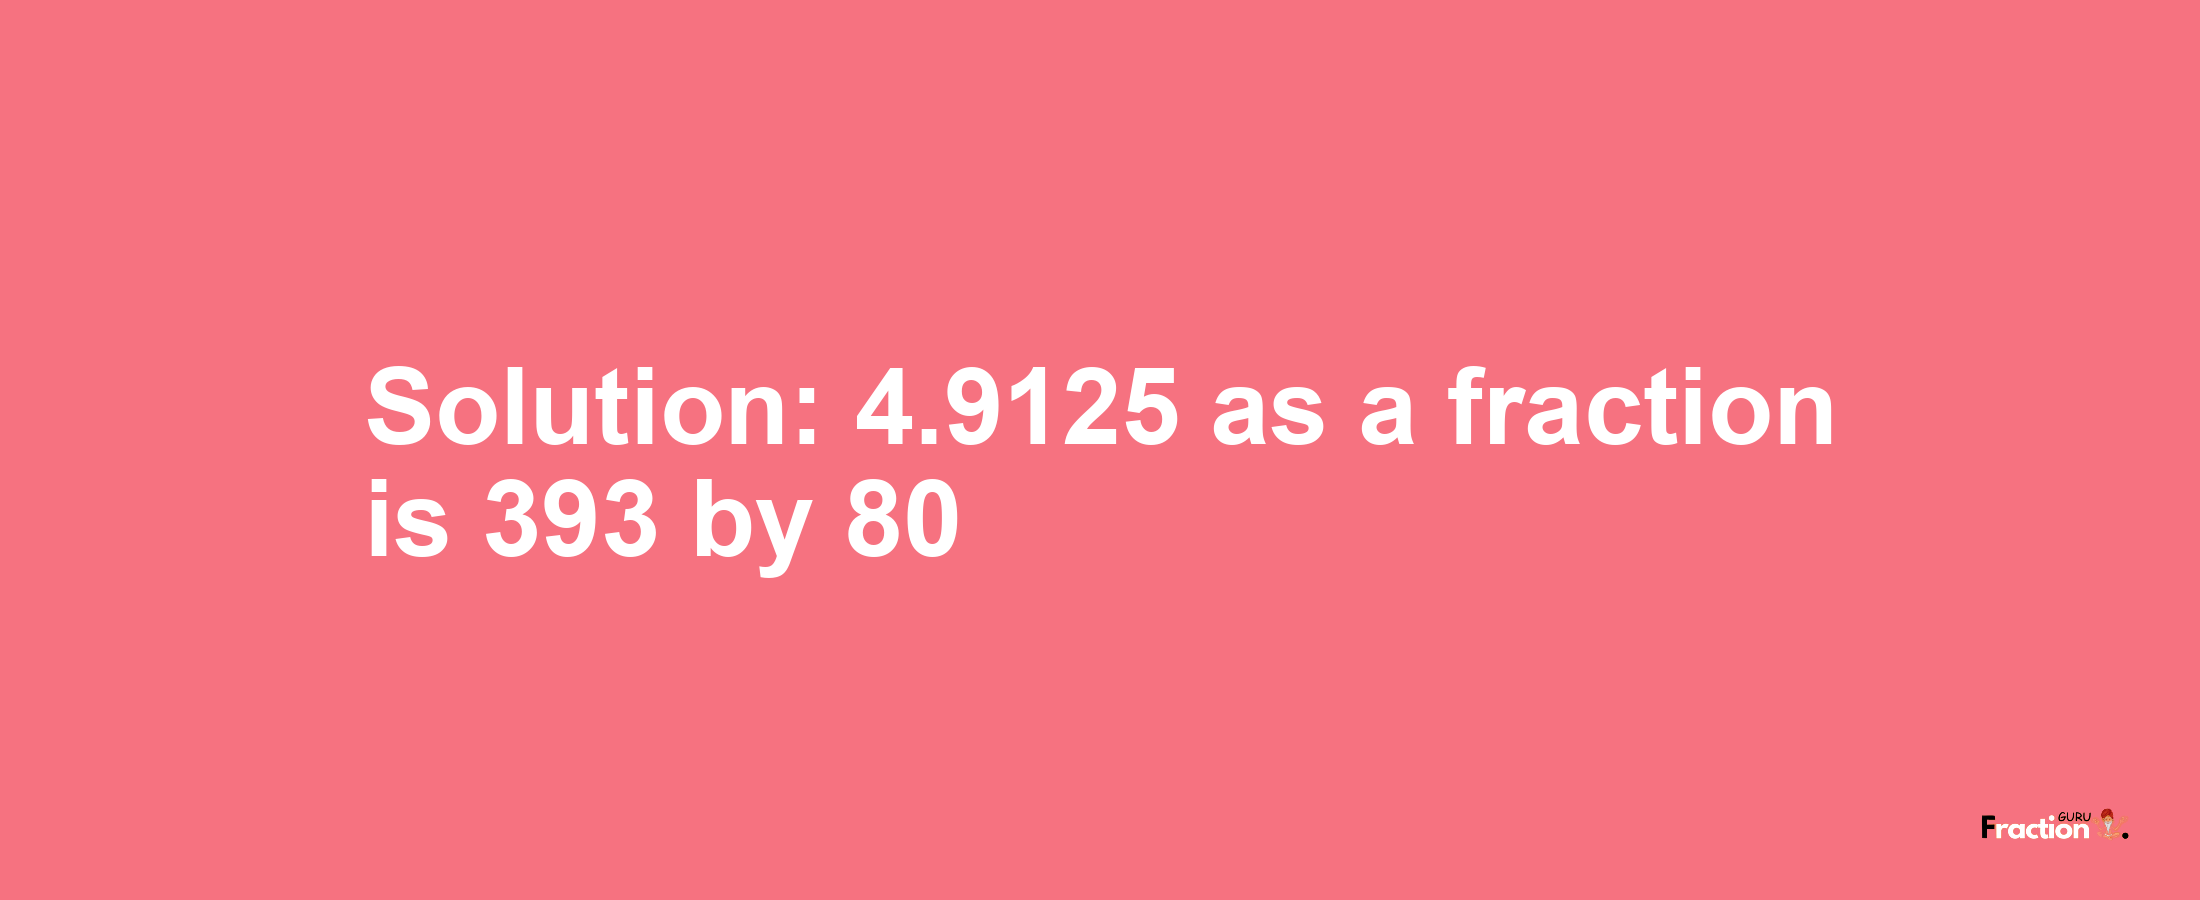 Solution:4.9125 as a fraction is 393/80